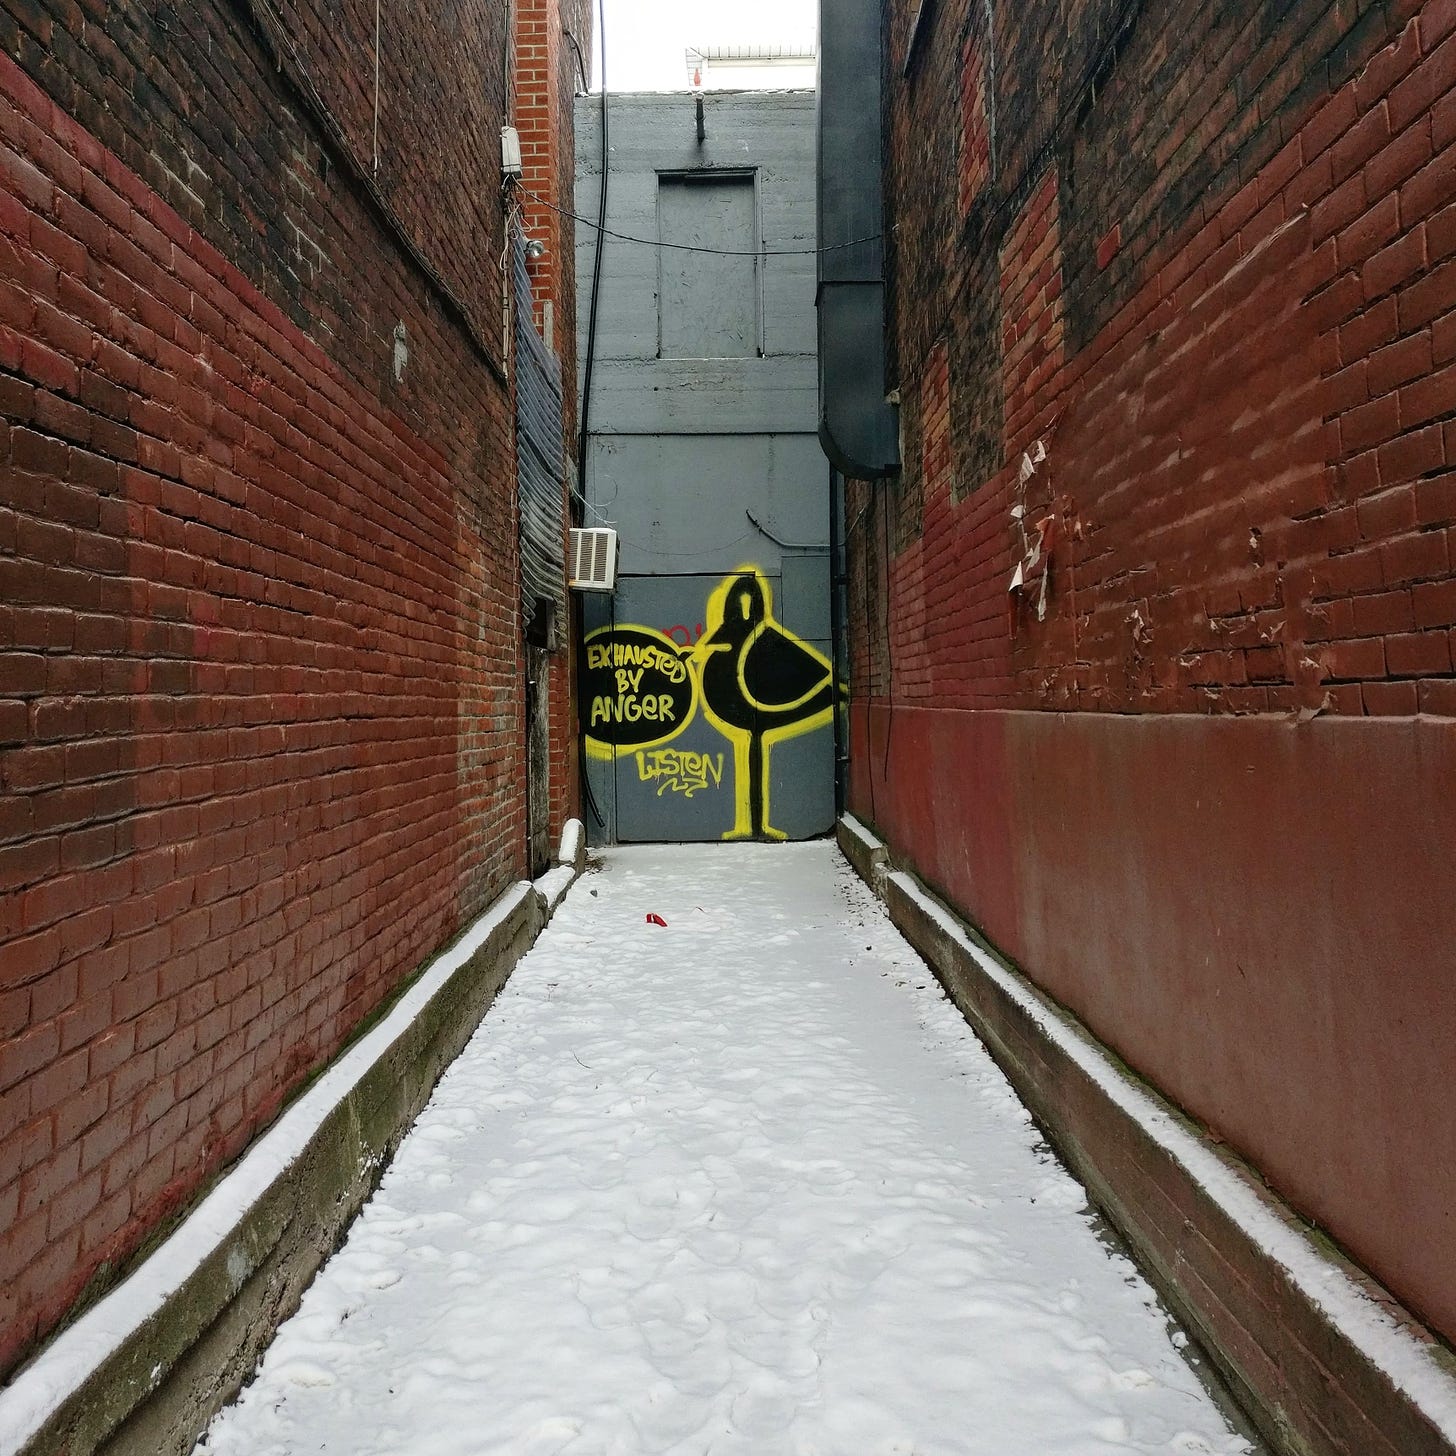 A dead end alley in Montreal with a graffit bird at the end, saying "exhausted by anger." The bird is black with a yellow outline on a narrow gray wall. The other two walls are red brick, patched and painted. The ground is covered in snow.